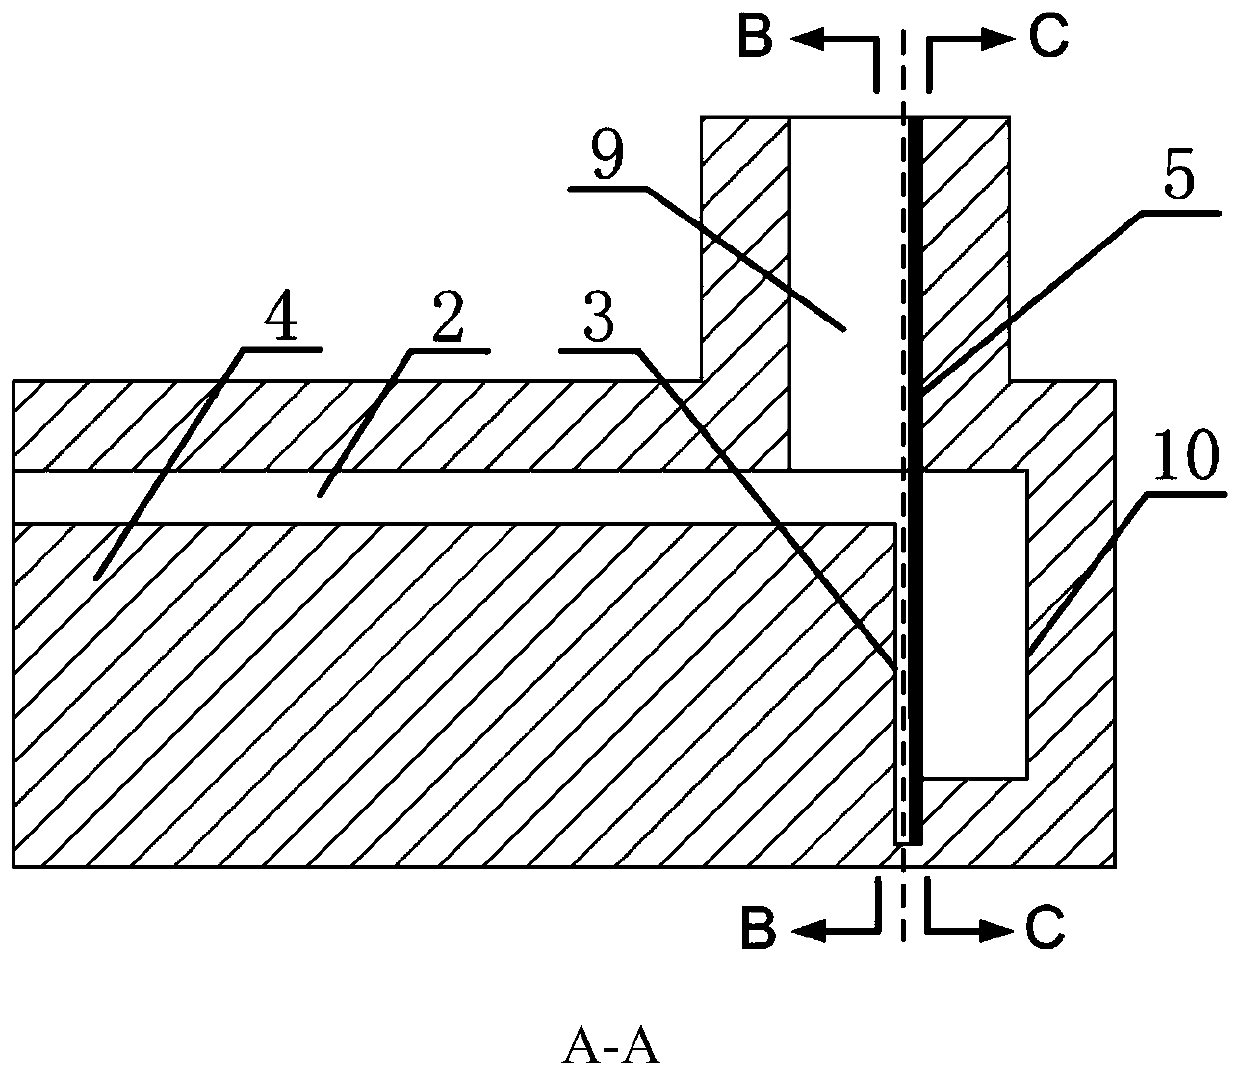 Non-contact type ridge waveguide, micro-strip and coupling slot probe transition circuit